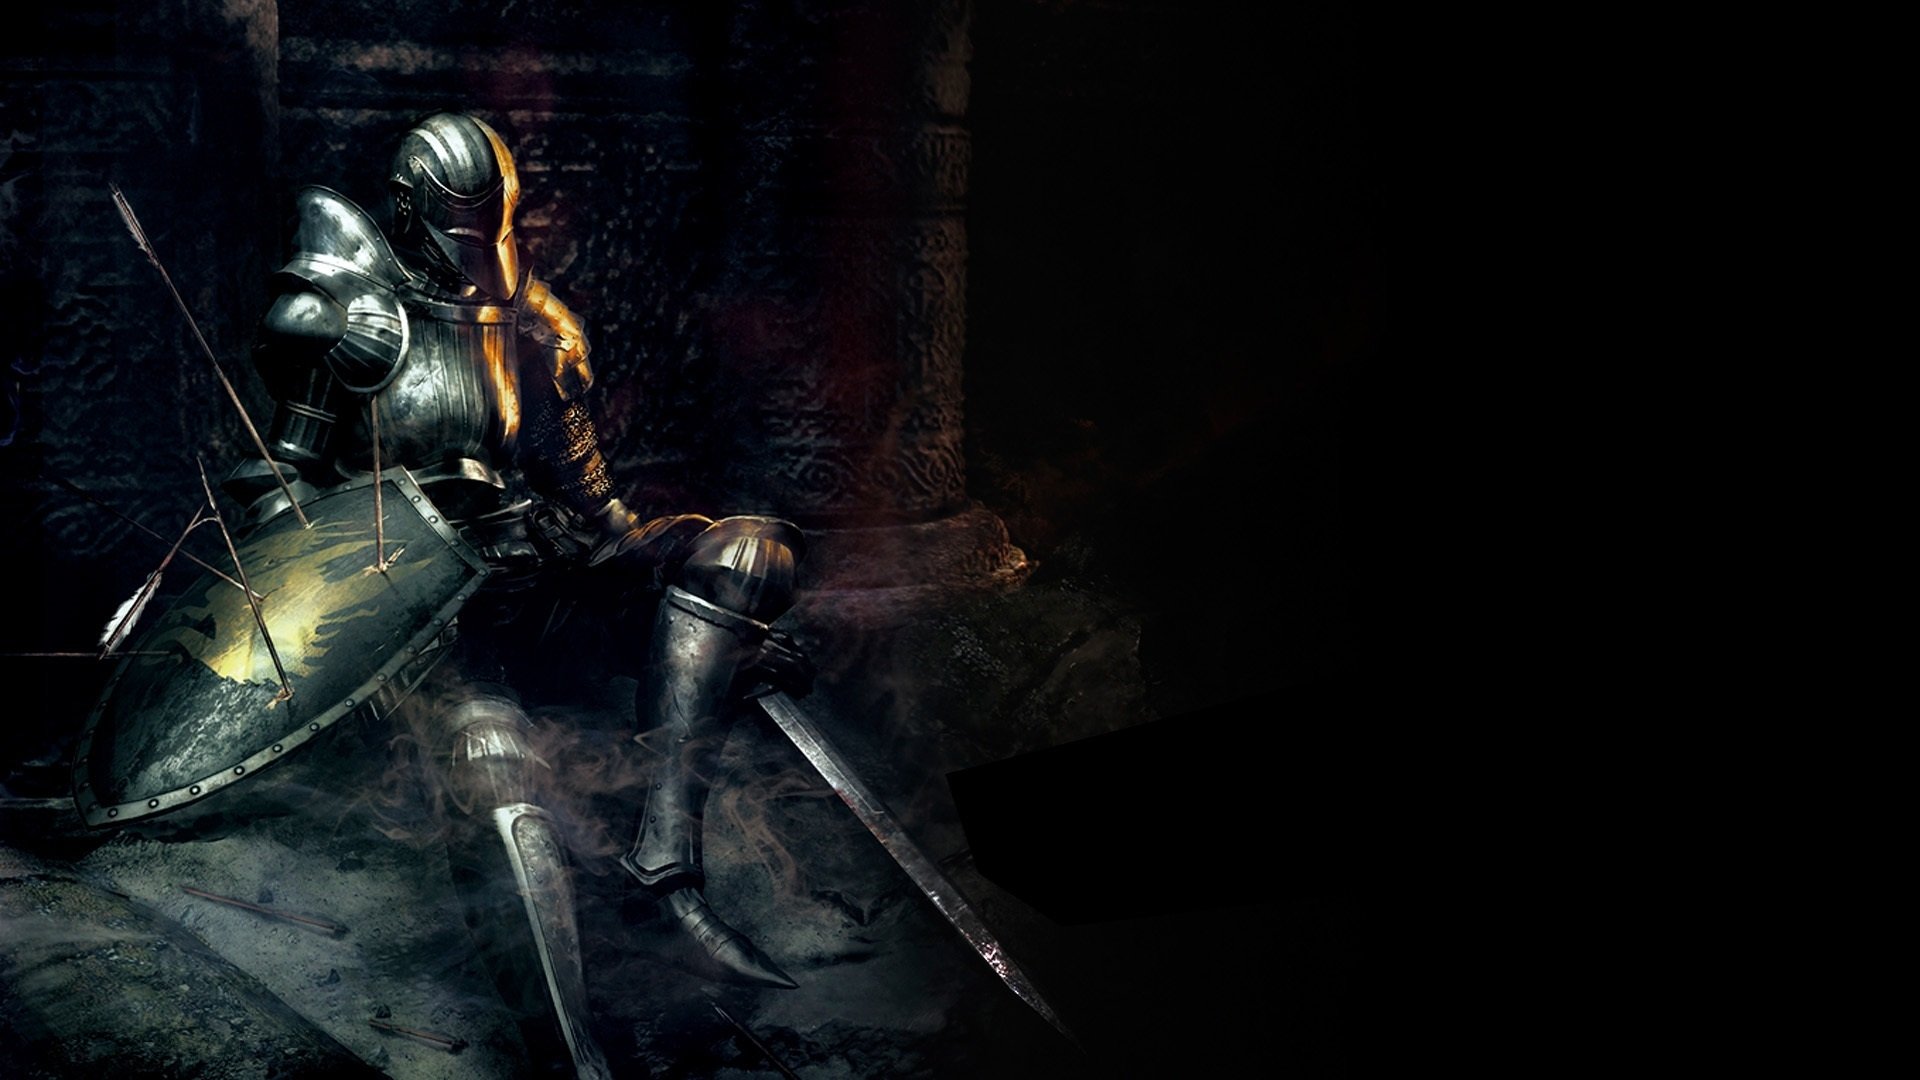 When Will The Demon's Souls Remake Be Released on PC?